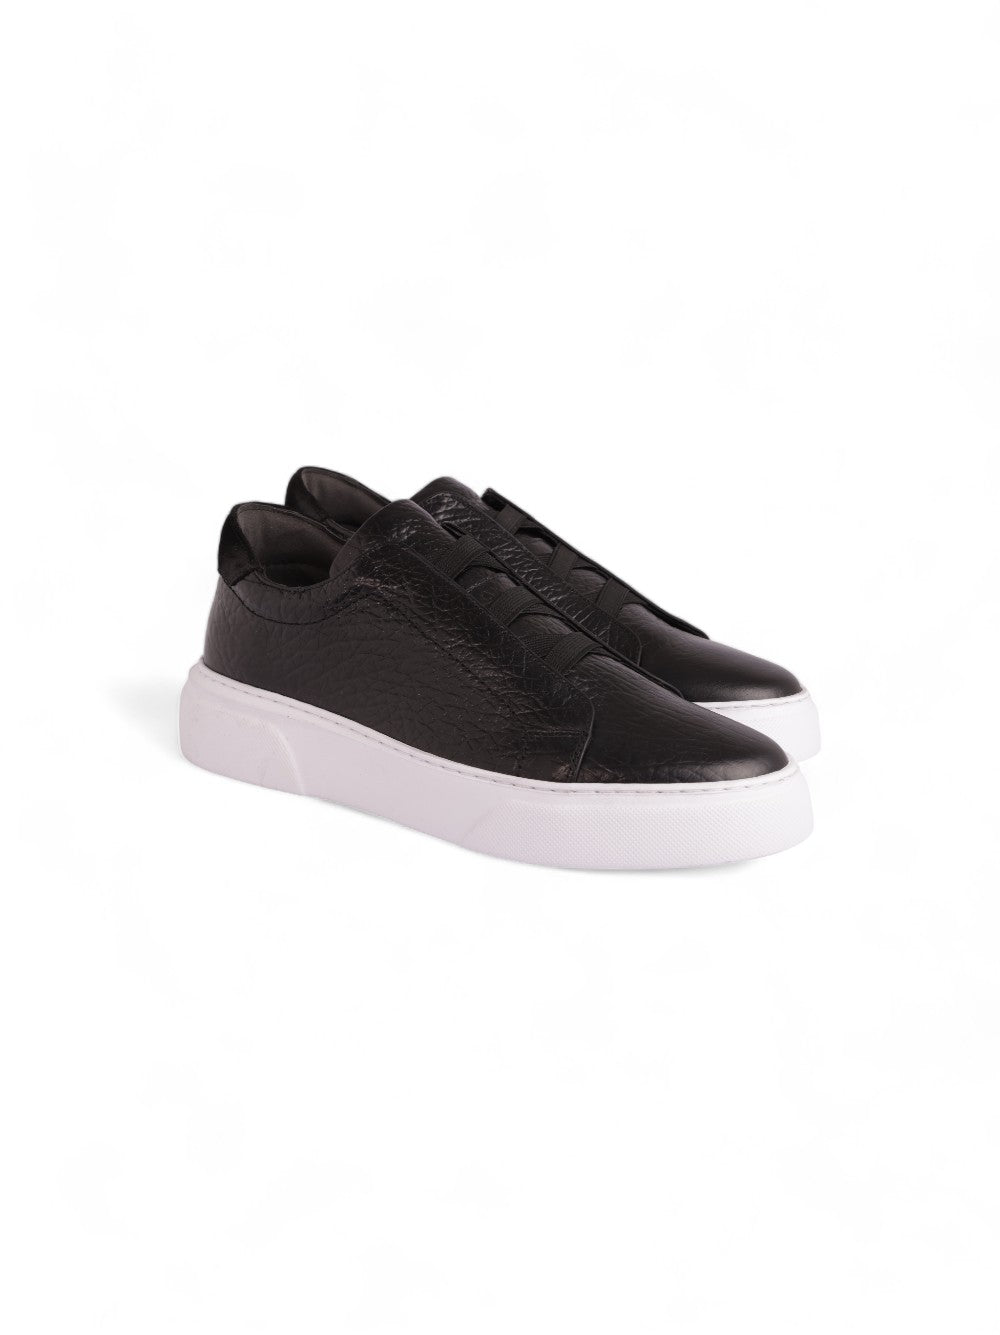 Casual Black Shoes With White Insole